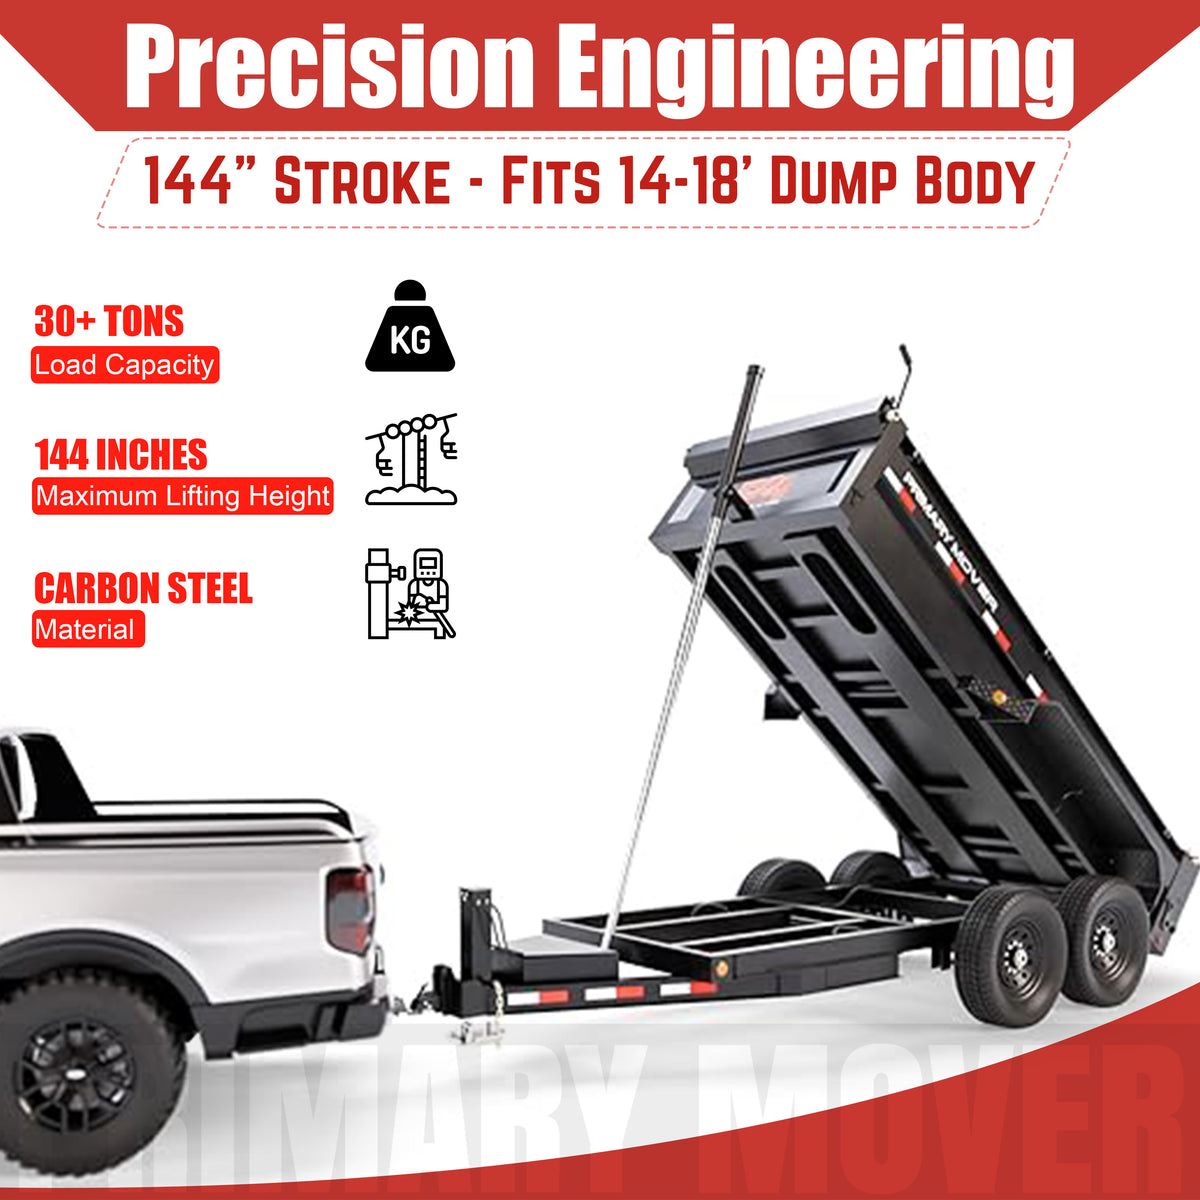 Telescopic Dump Trailer Cylinder Kit - 30 Ton Capacity - 144 Stroke. Includes cylinder, hydraulic unit, fittings, and safety features. Shown attached to a truck and trailer.